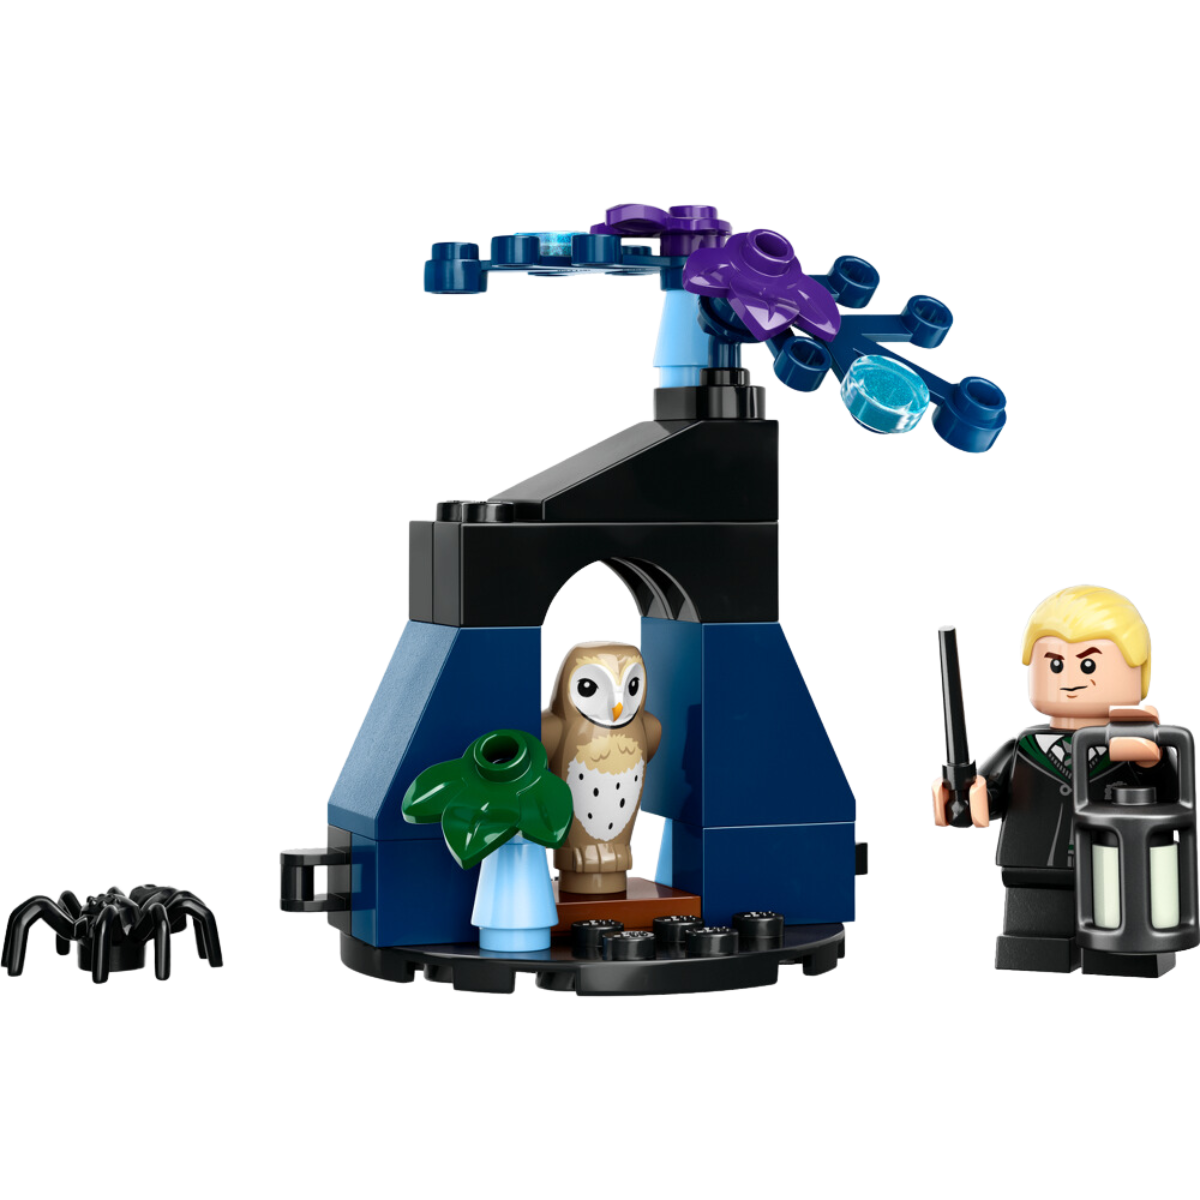 LEGO Harry Potter Draco in the Forbidden Forest Polybag 30677